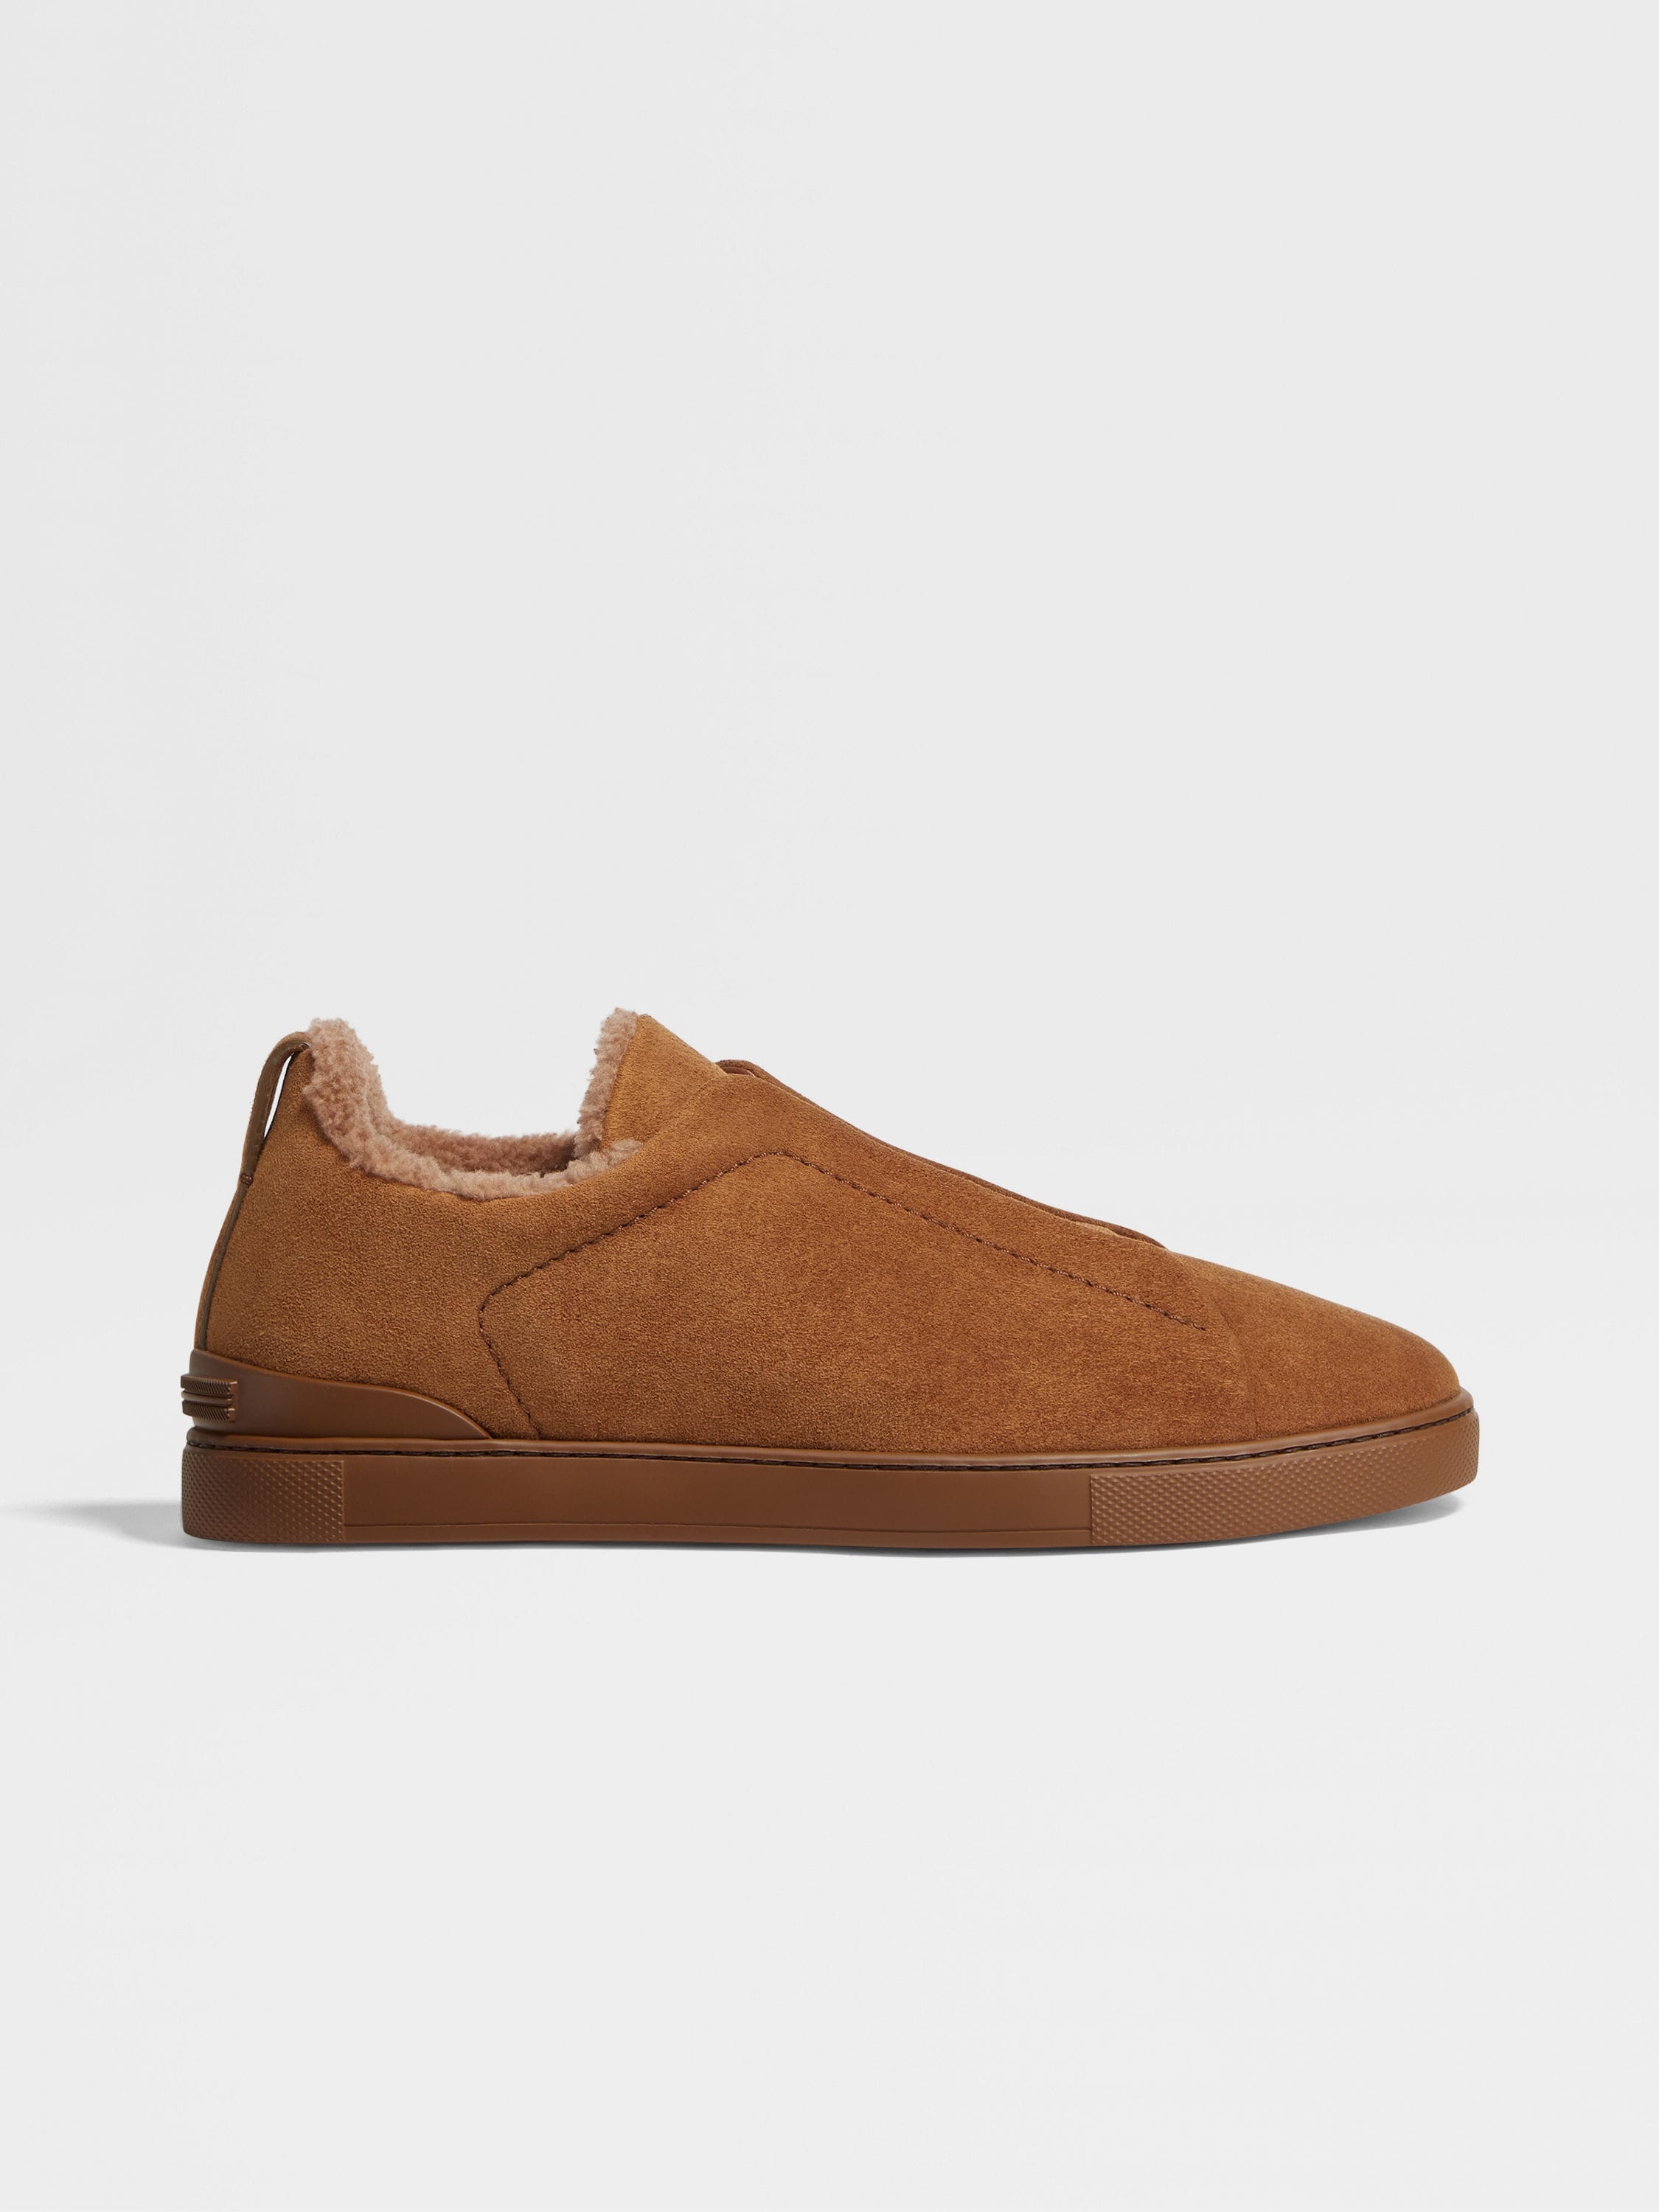 LIGHT BROWN SUEDE TRIPLE STITCH™ SNEAKERS - 4